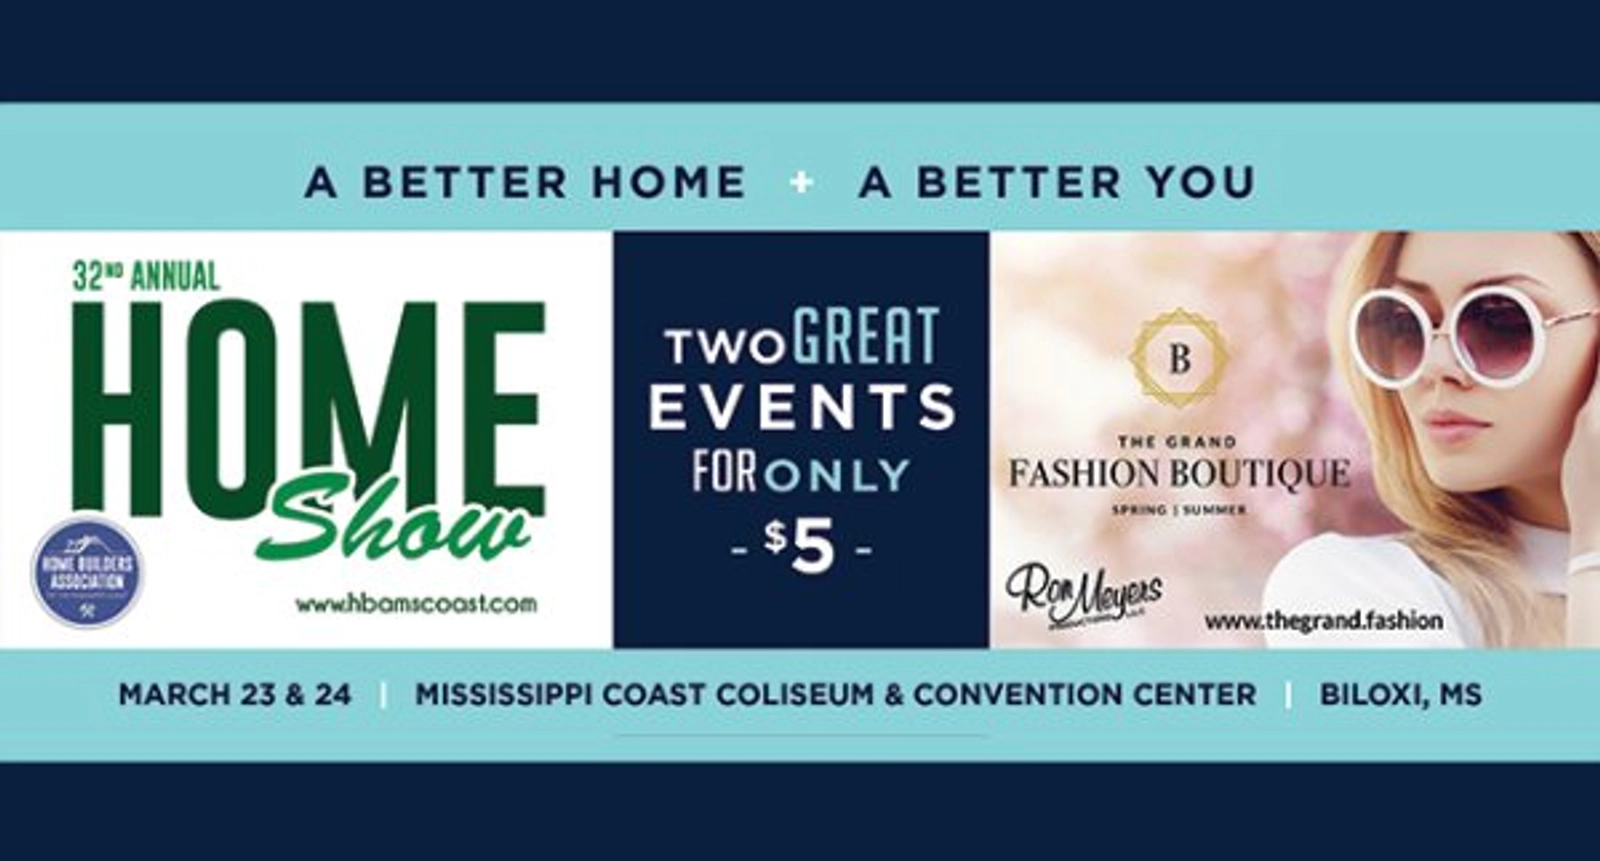  32nd Annual Home Show and The Grand Fashion Boutique  - Thumbnail Image